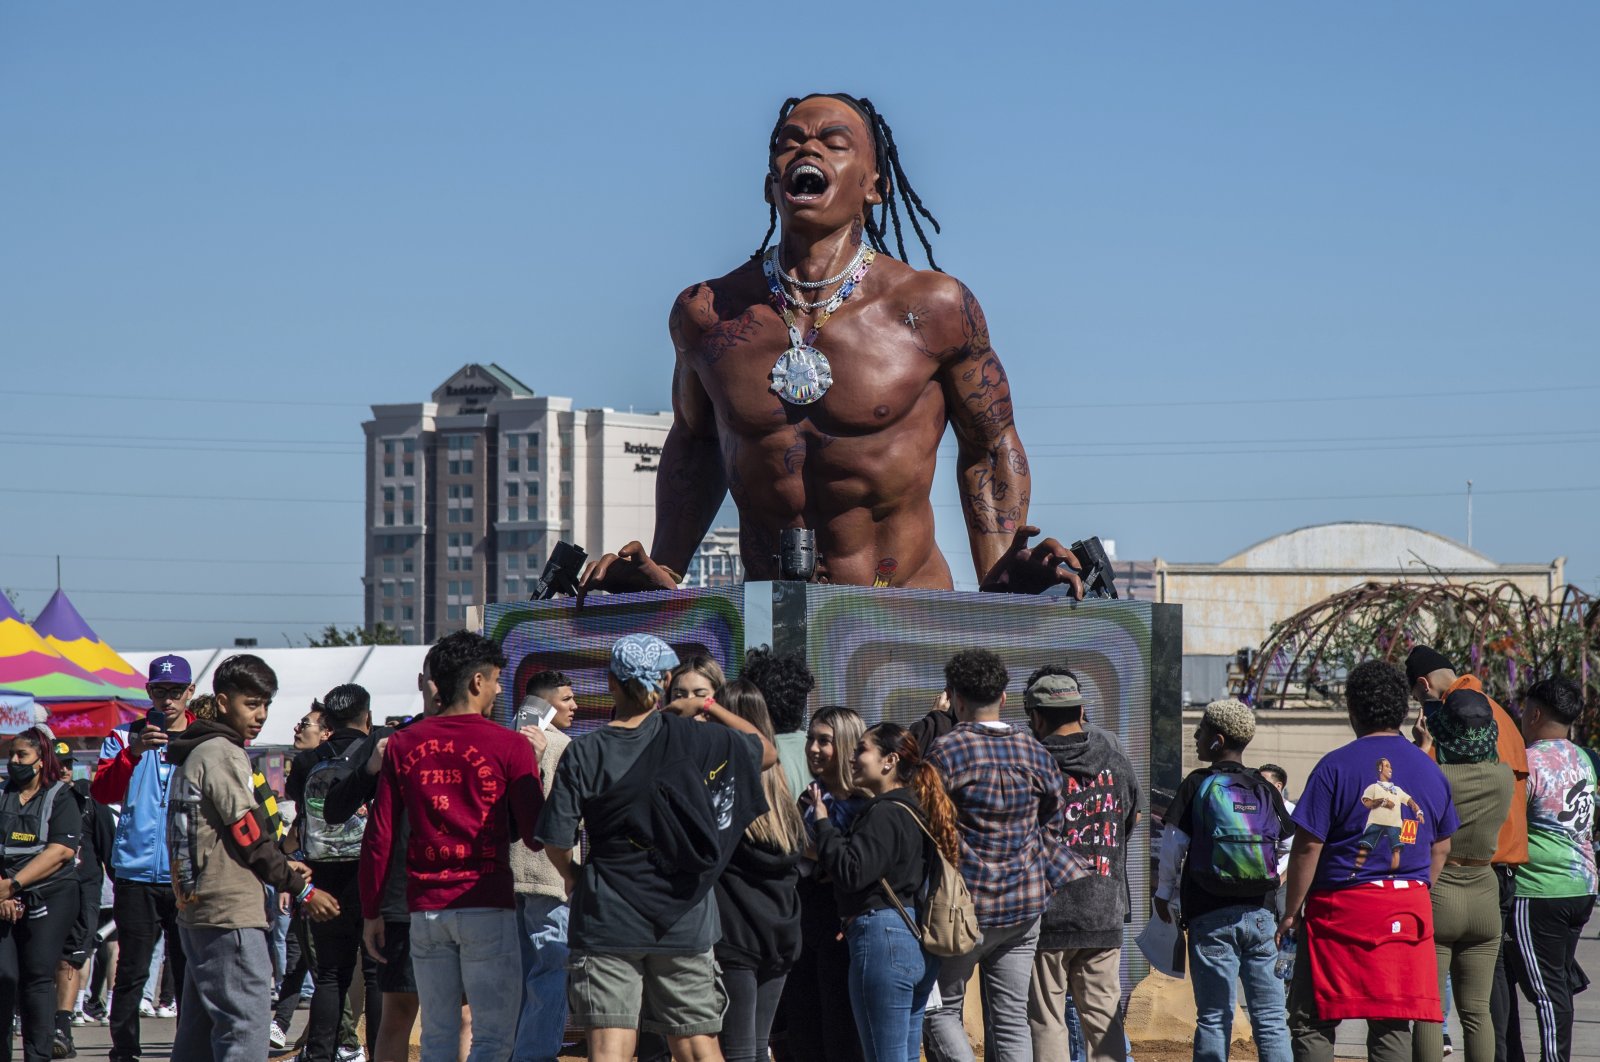 Festival goers are seen on day one of the Astroworld Music Festival at NRG Park, Houston, Texas, U.S., Nov. 5, 2021. (AP Photo)